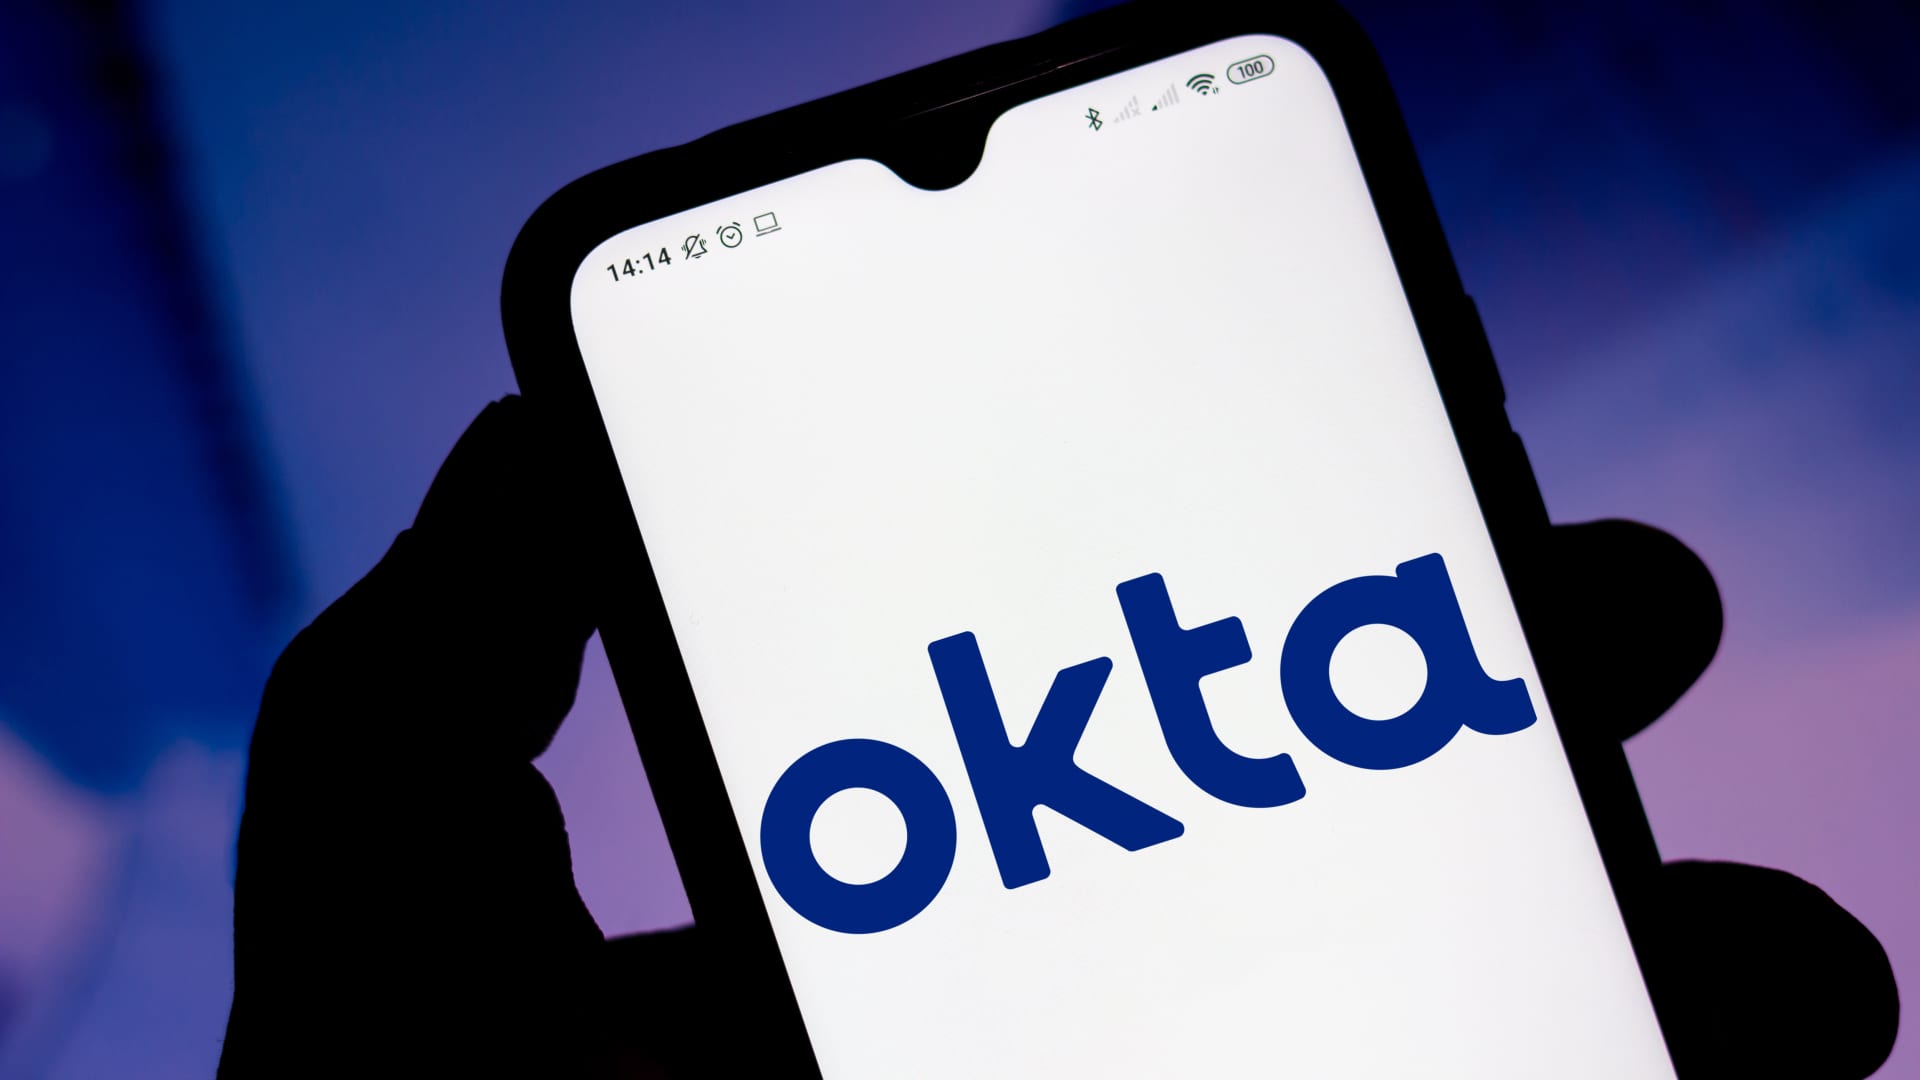 Okta CEO on MGM breach: Companies are under ‘large attack from cybercriminals’